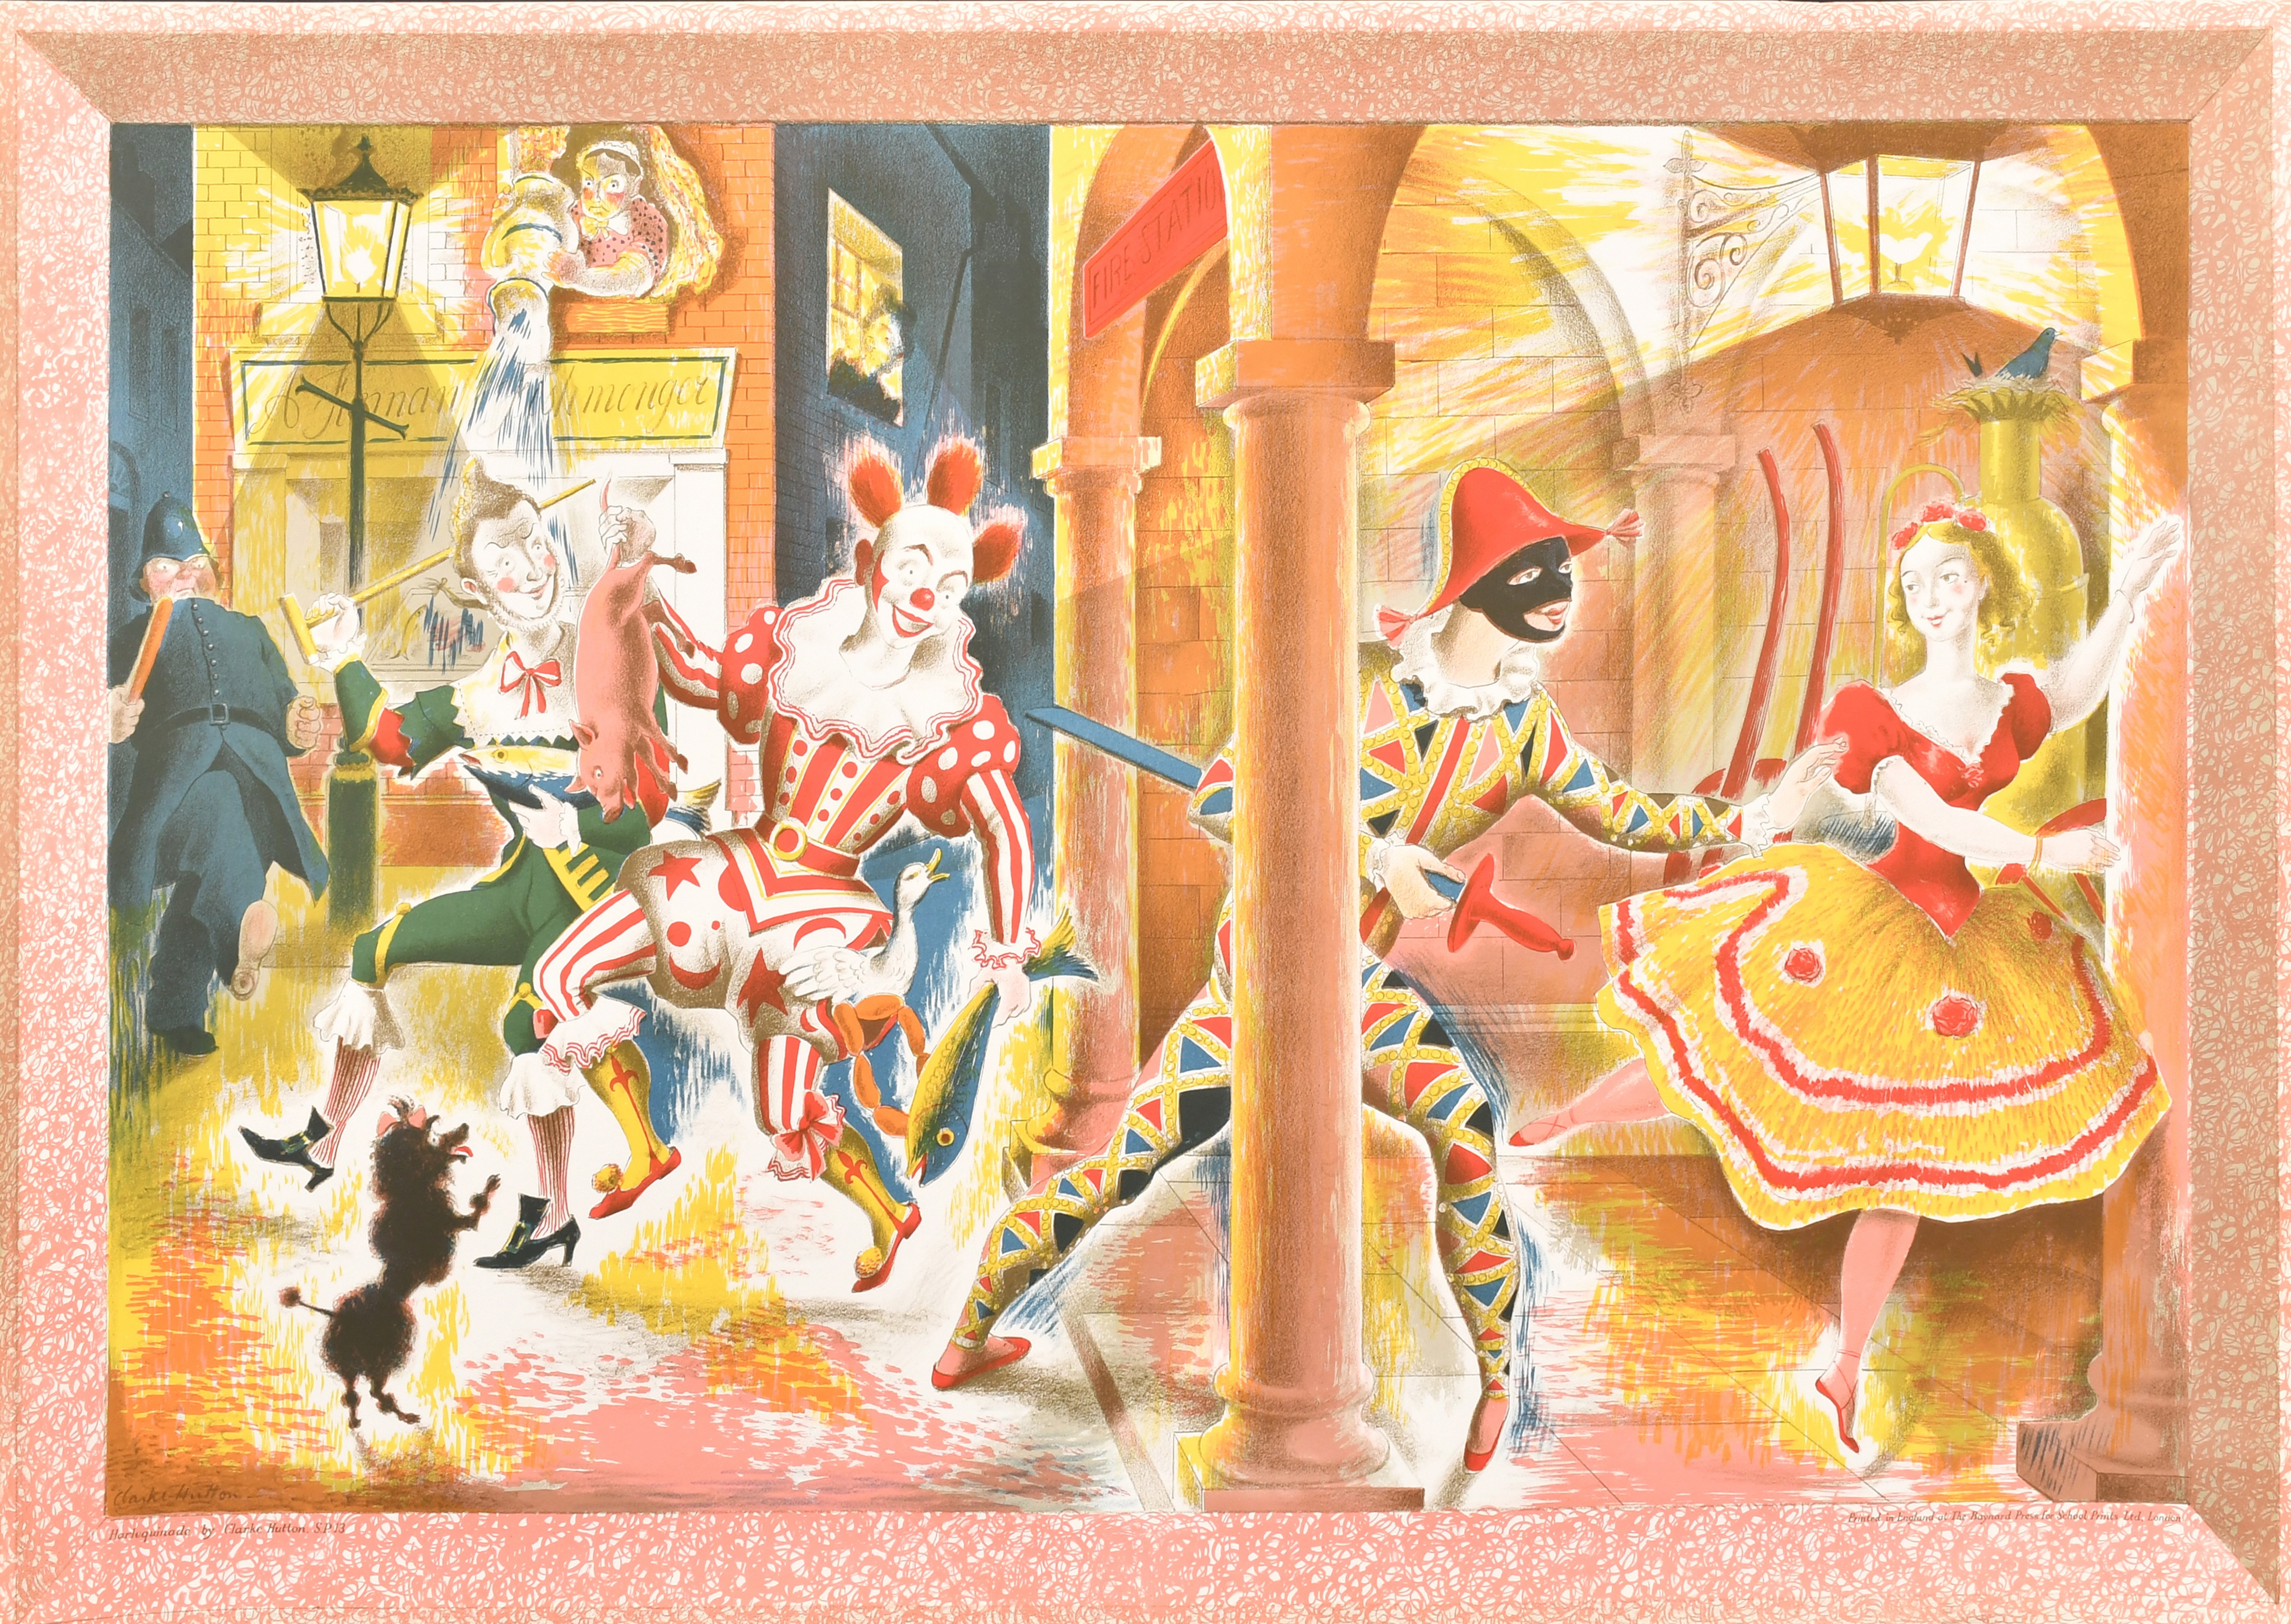 Clarke Hutton (1898-1984) British. "Harlequinade", Lithograph for The Baynard Press for School